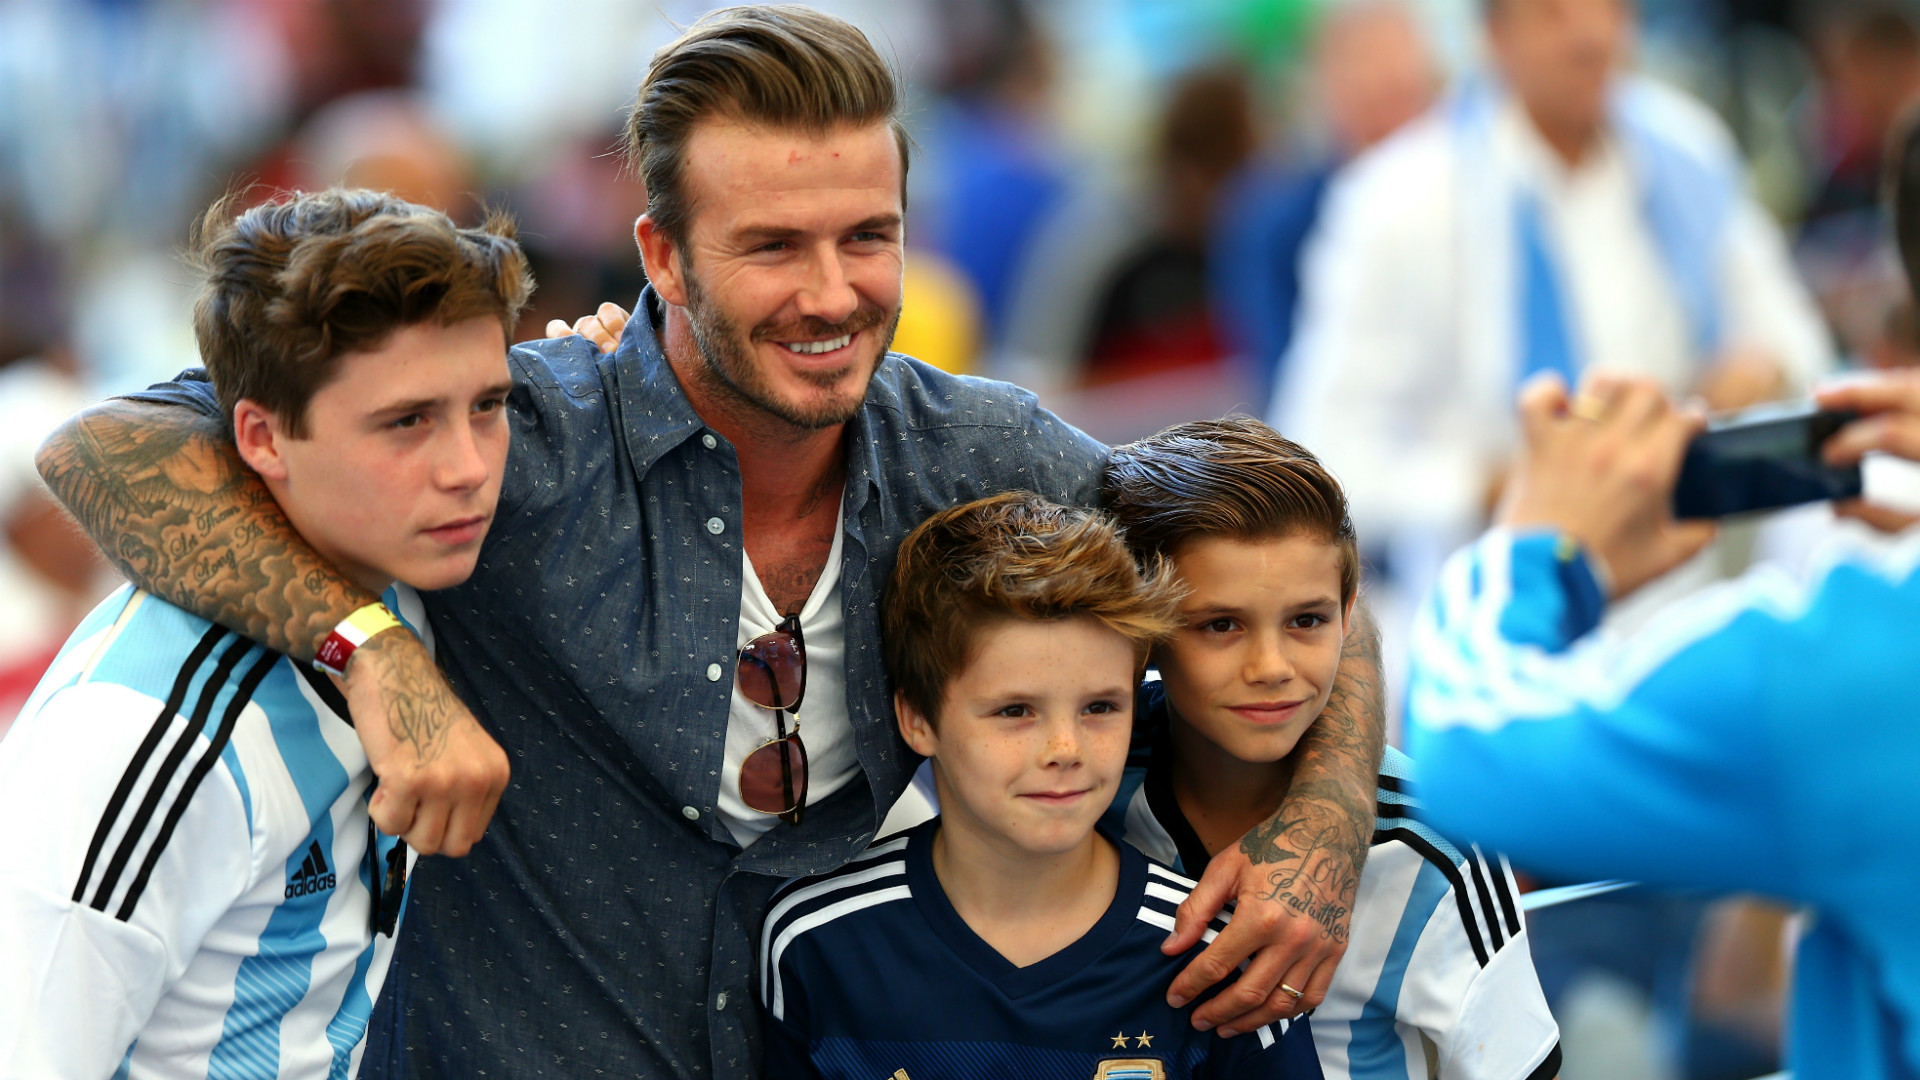 David Beckham's family: Which of his 